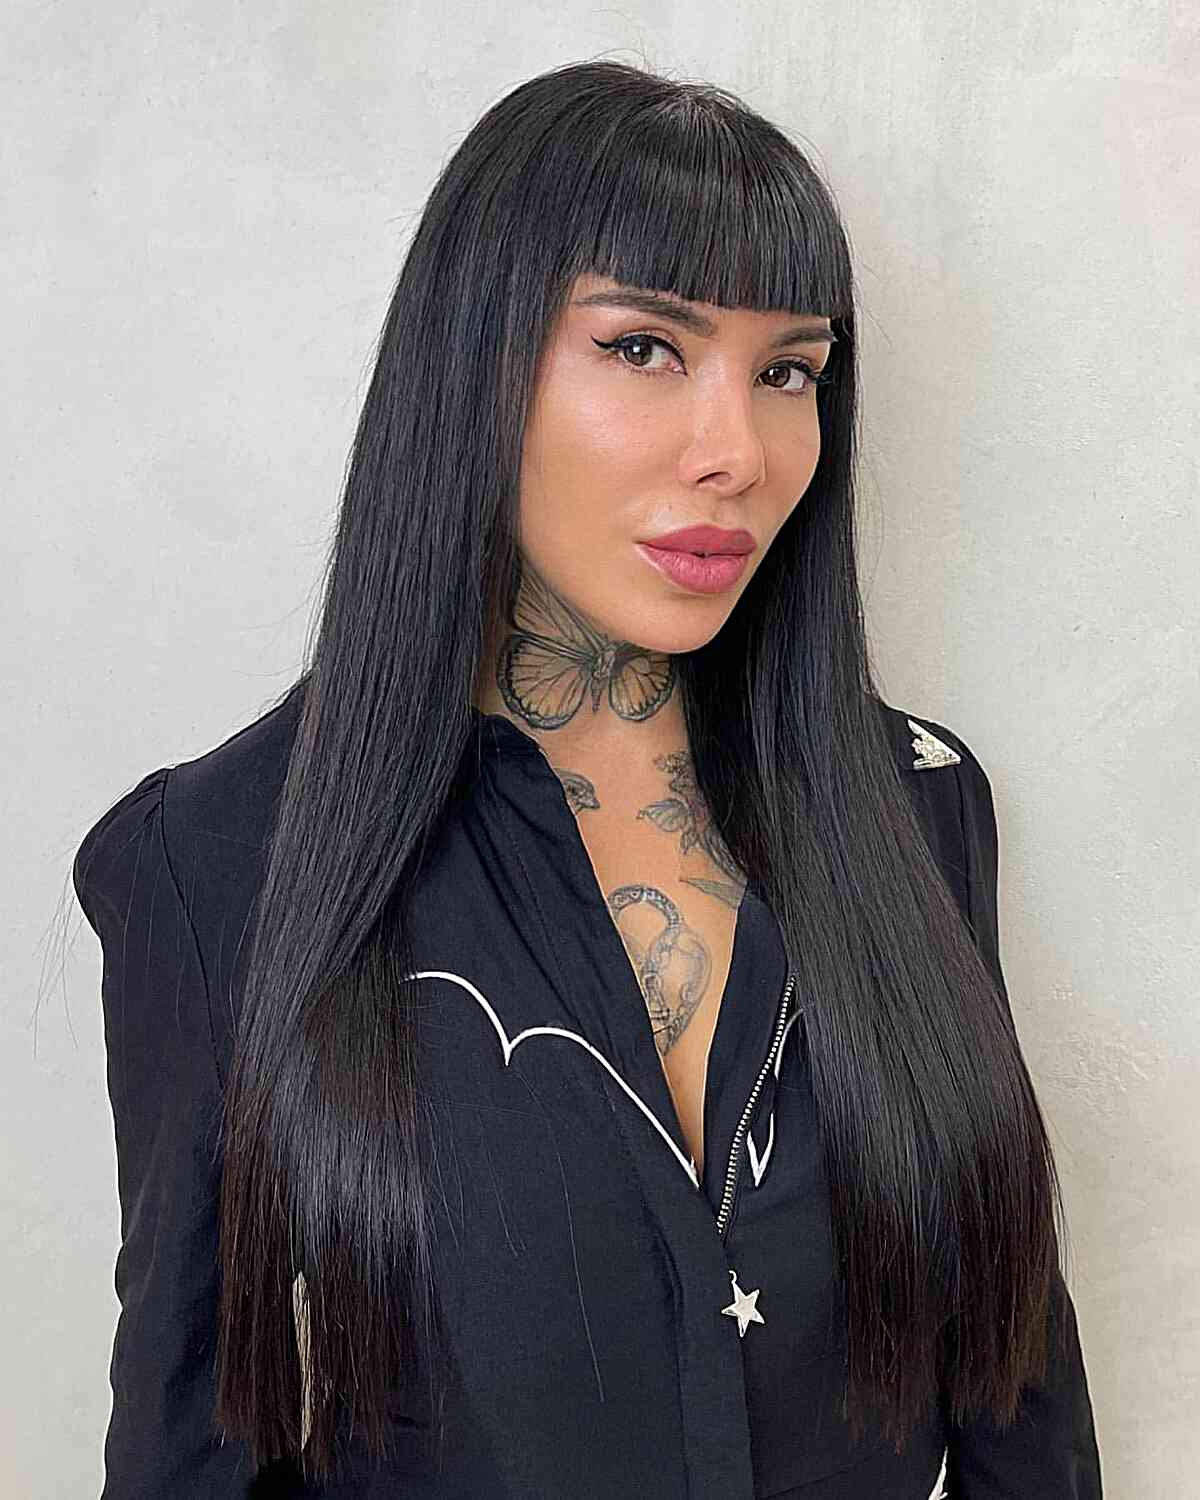 Long Black Straight Hair with Straight, Blunt Bangs